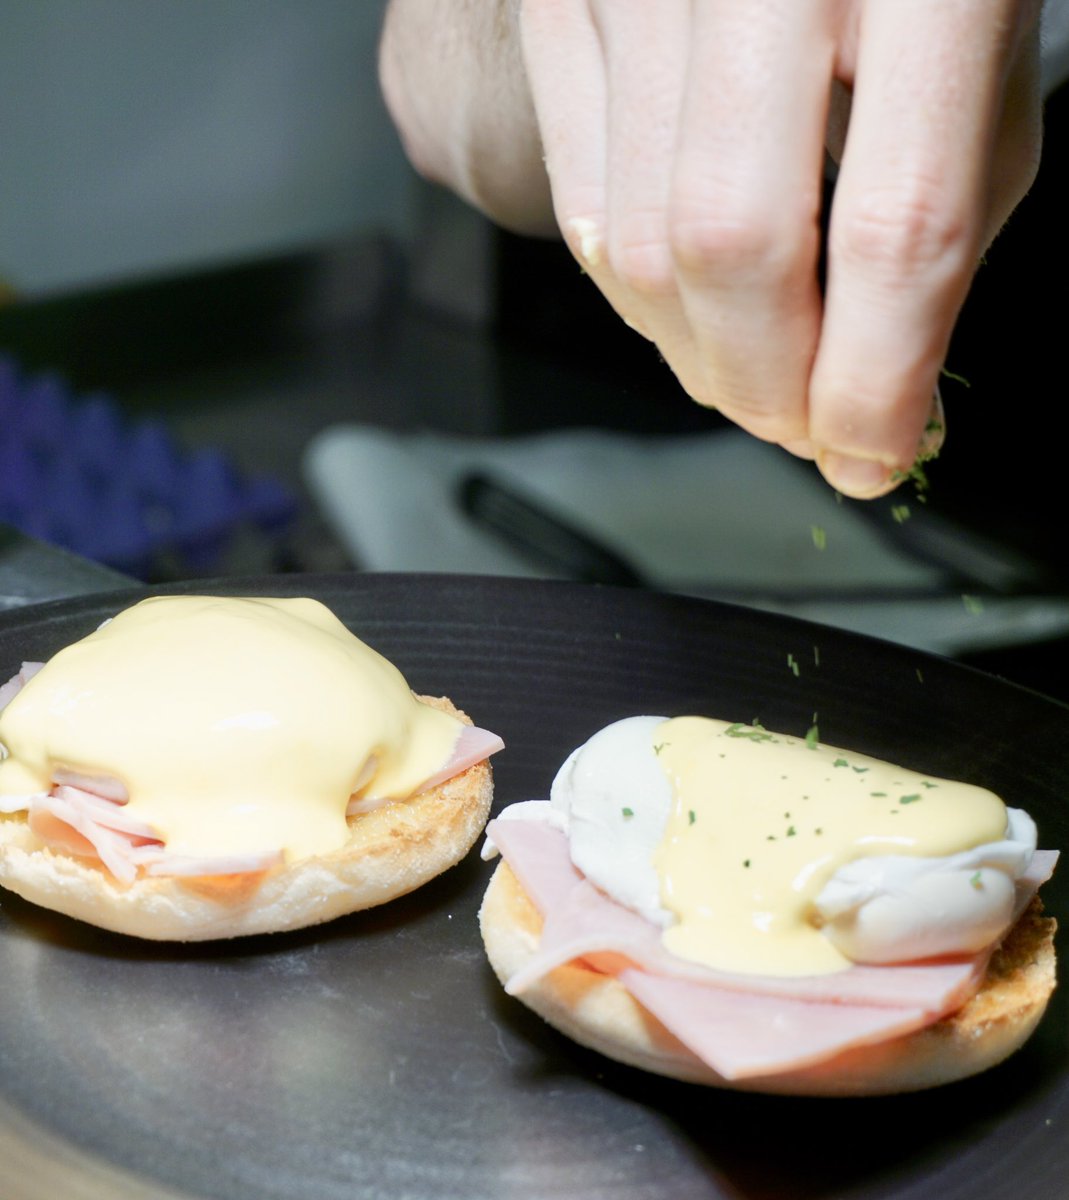 It’s all the little touches that count ✨

#eggsbenedict #breakfast #brunch #curleysdiningrooms #horwich #boostingbolton #eggs #hellohorwich